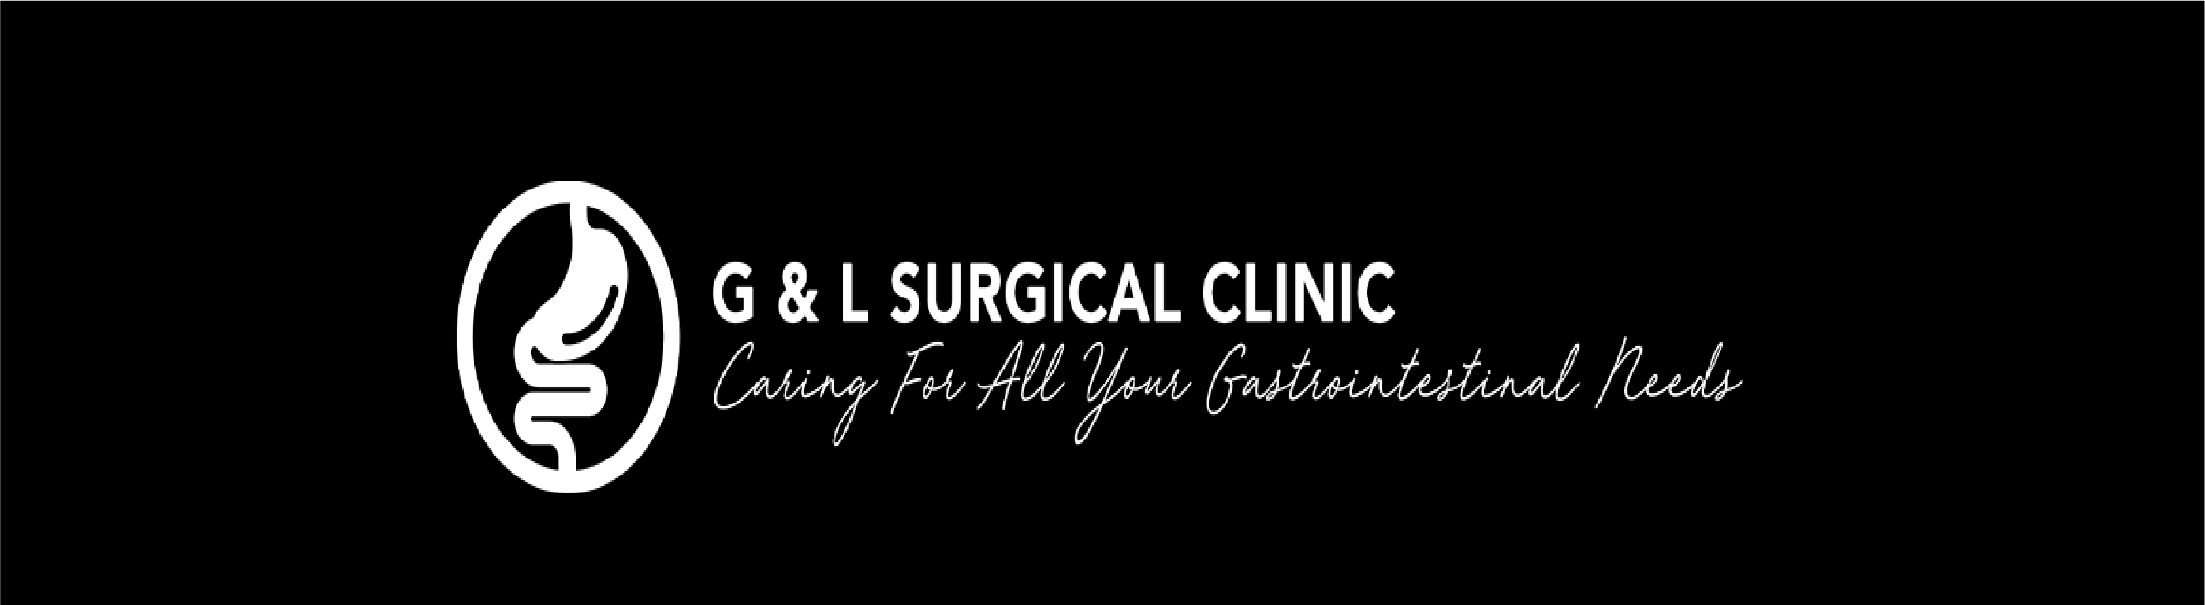 G.L SURGICAL CLINIC